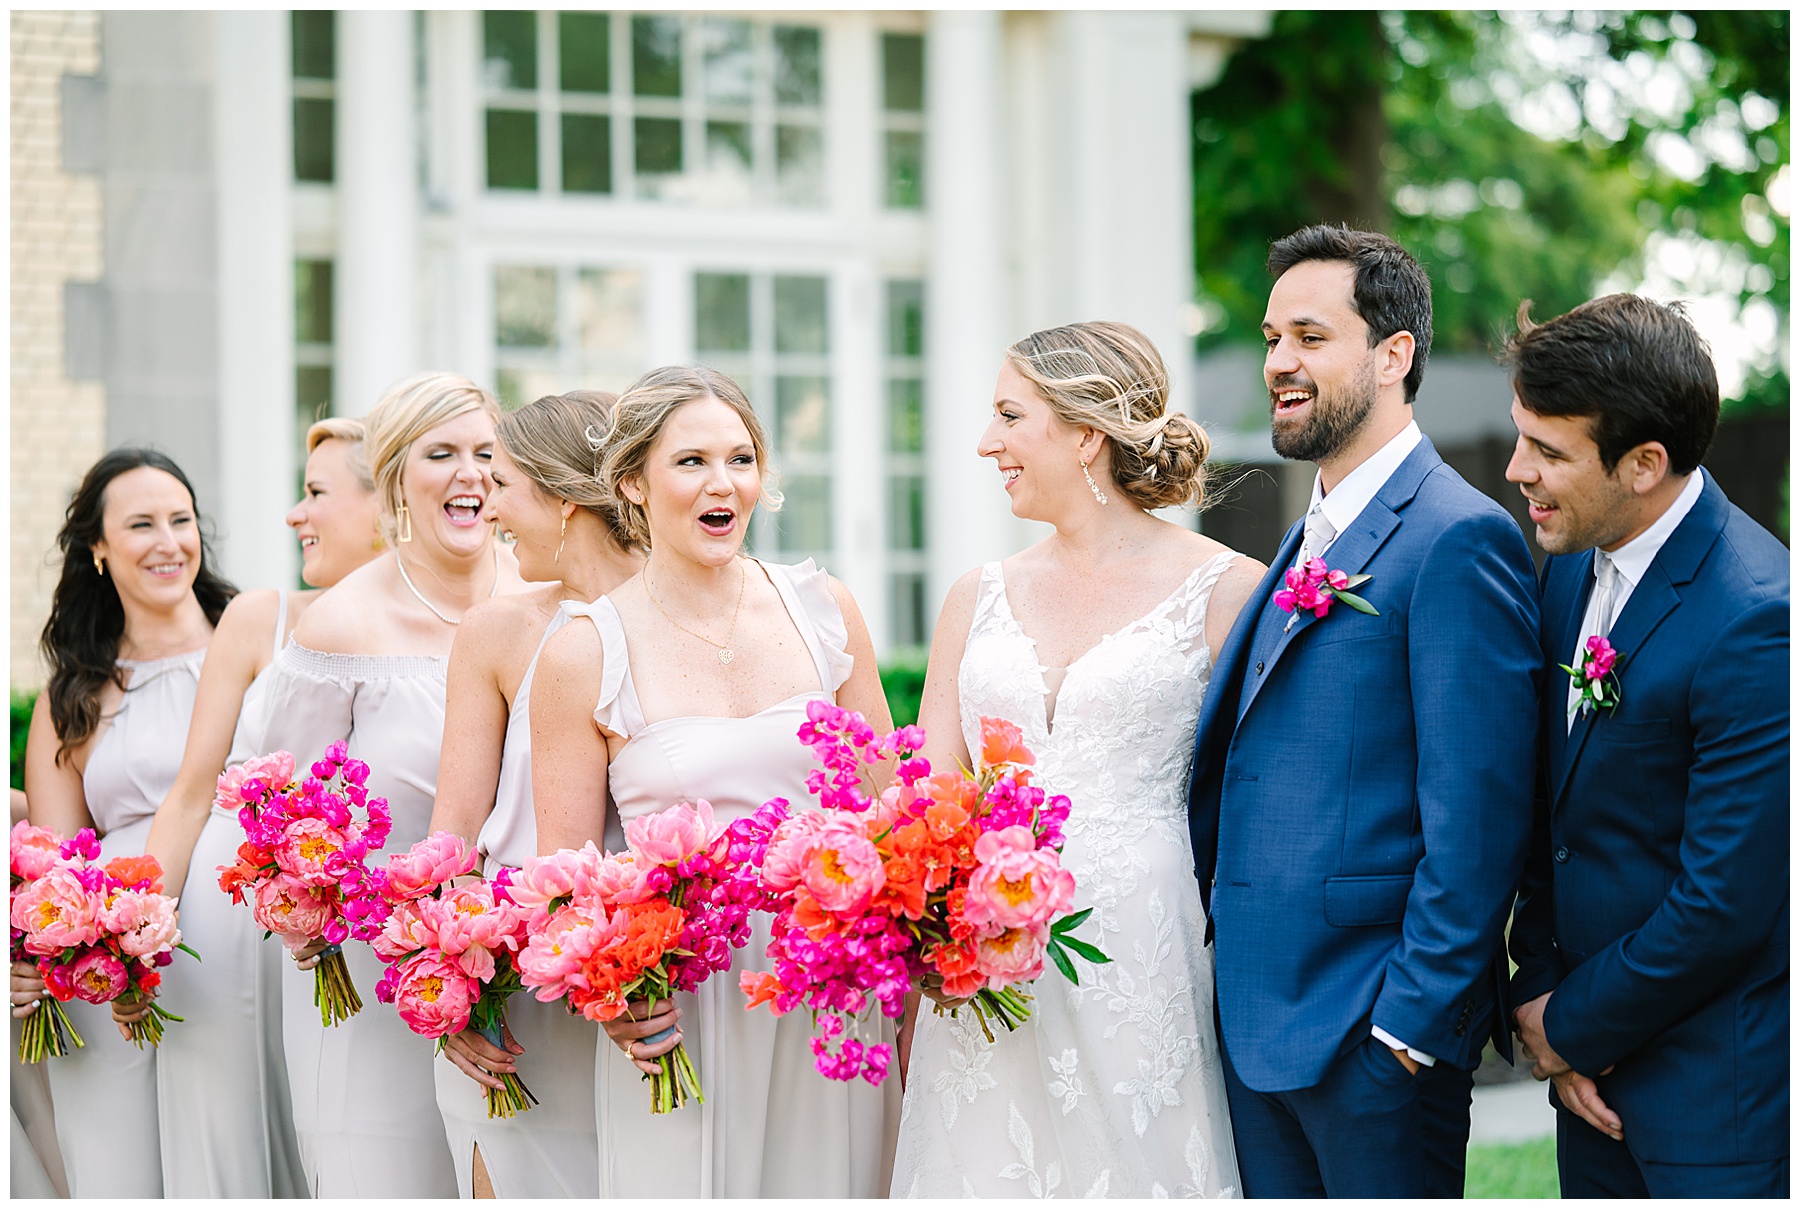 Charlotte wedding photographer captures wedding party laughing outside of Separk Mansion on Charlotte wedding day